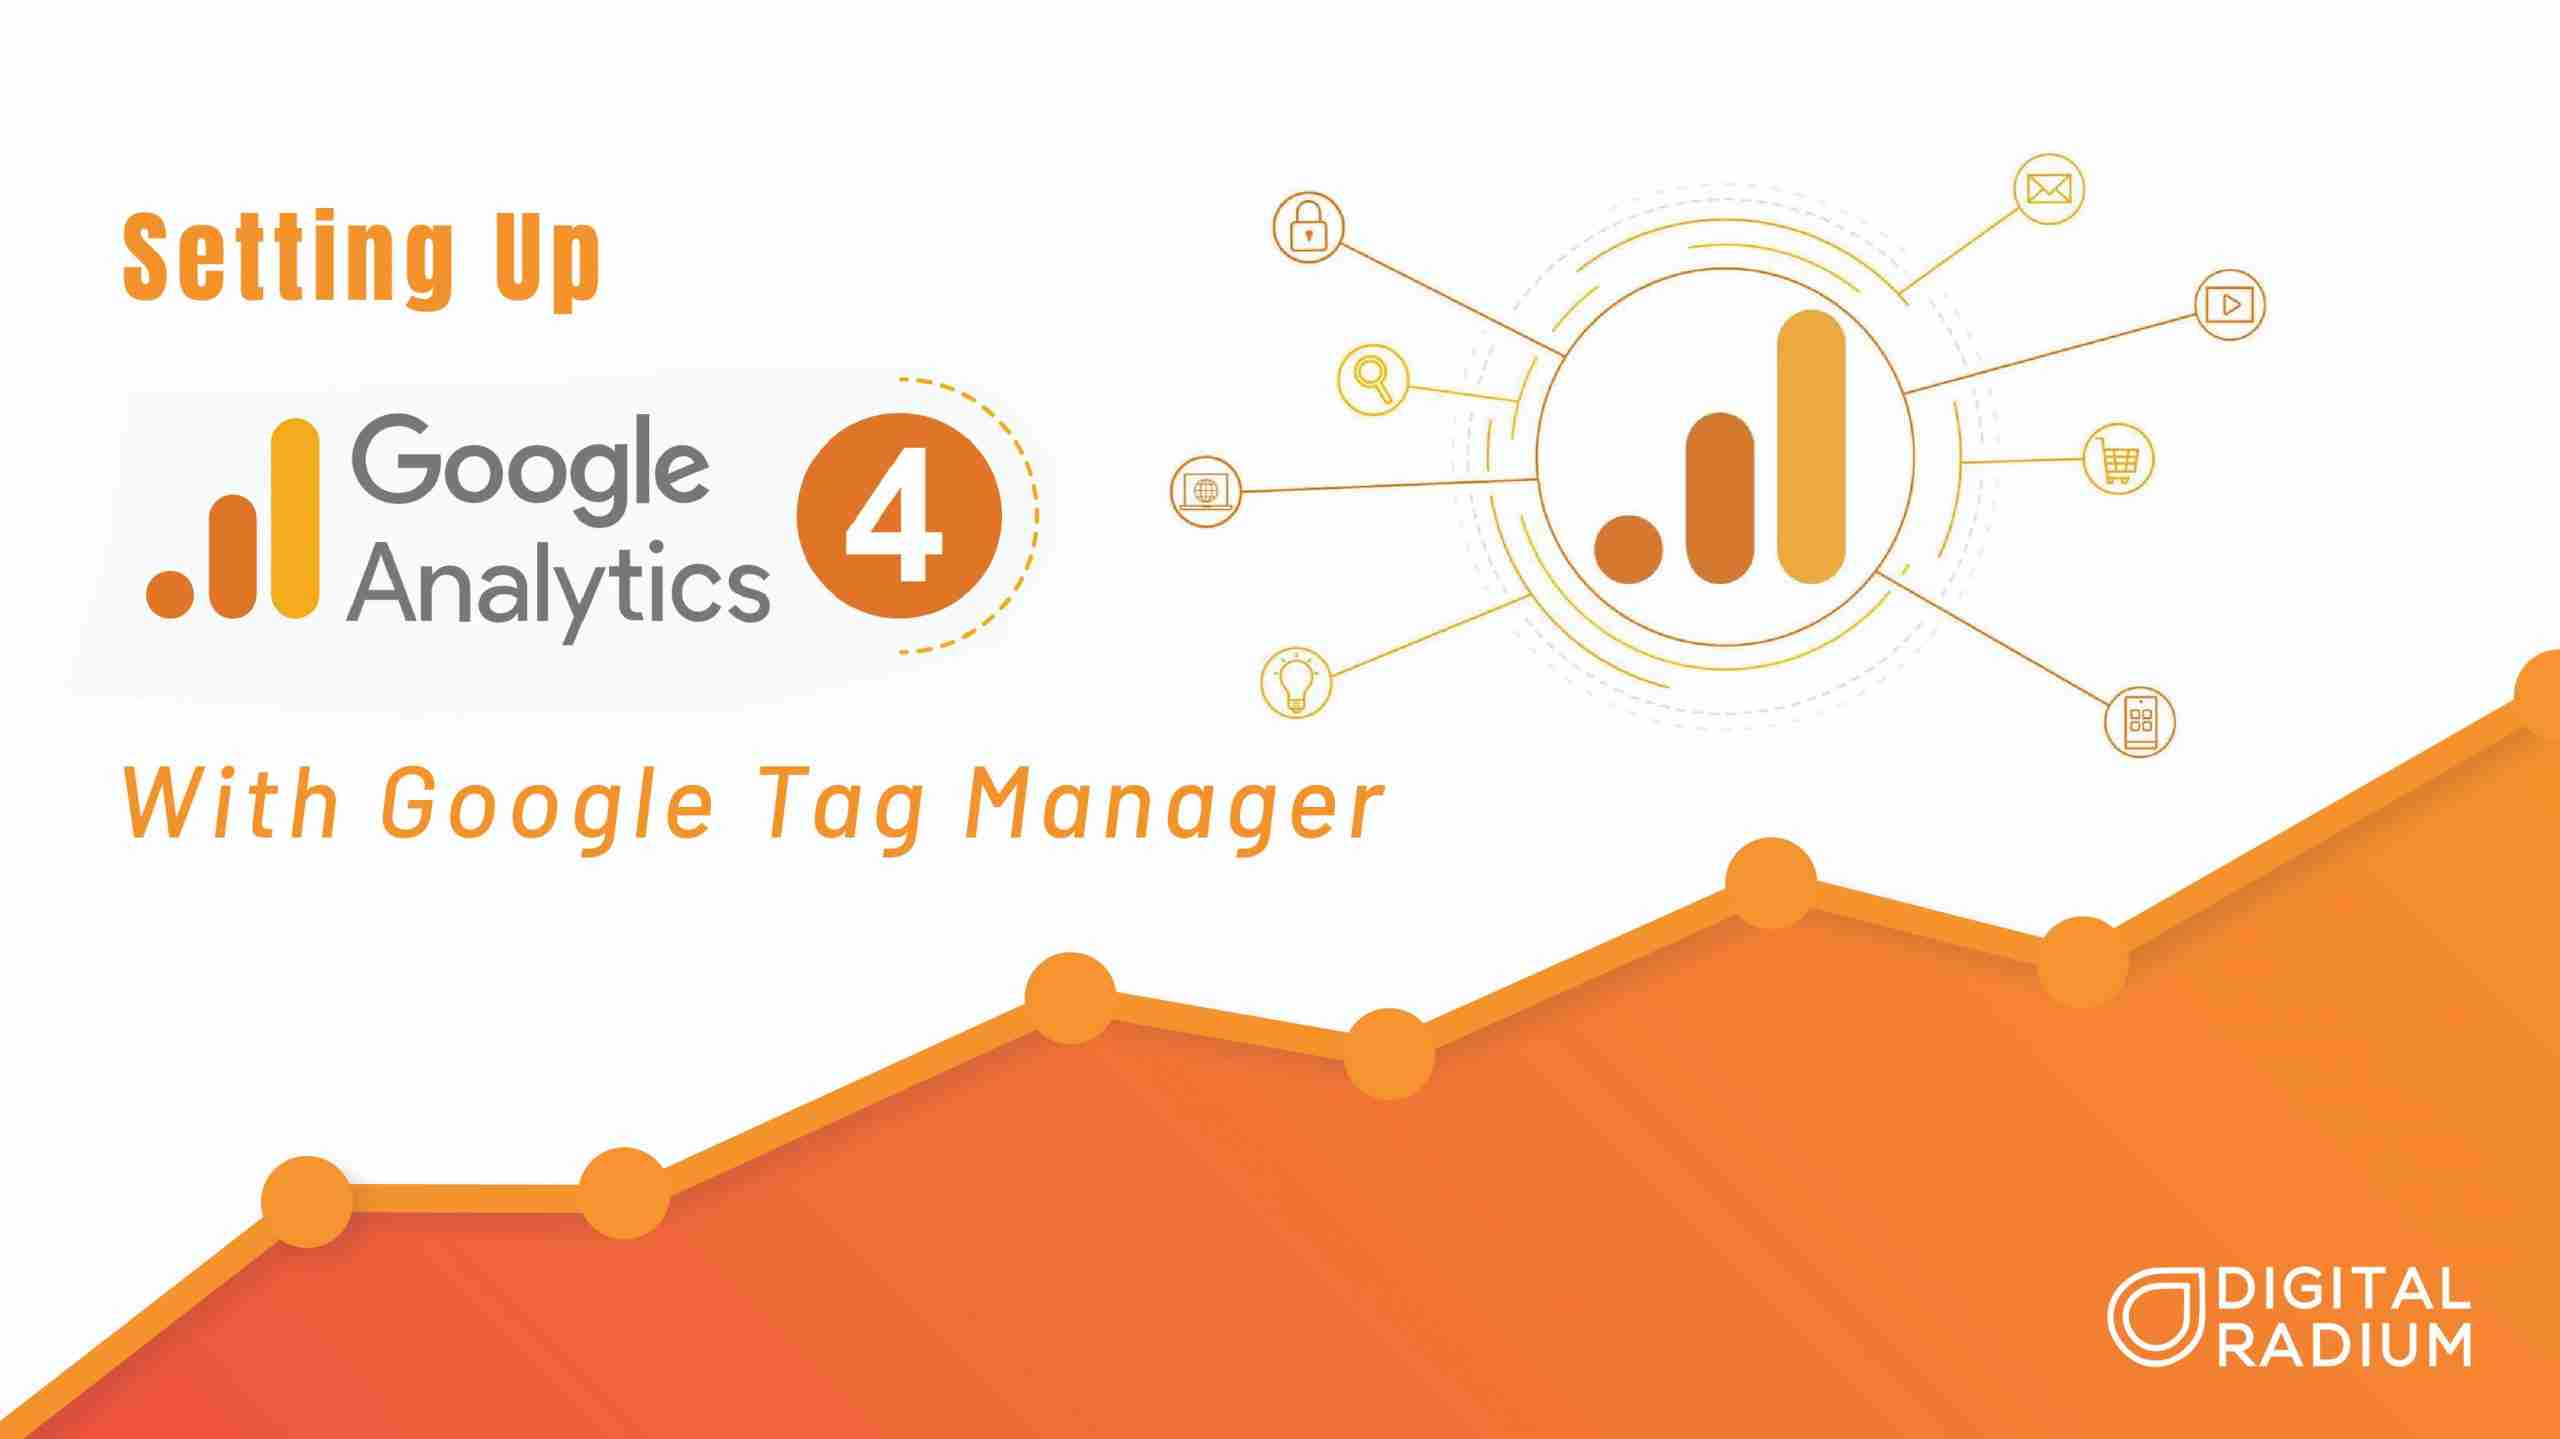 How To Set Up Google Analytics 4 Using Google Tag Manager?